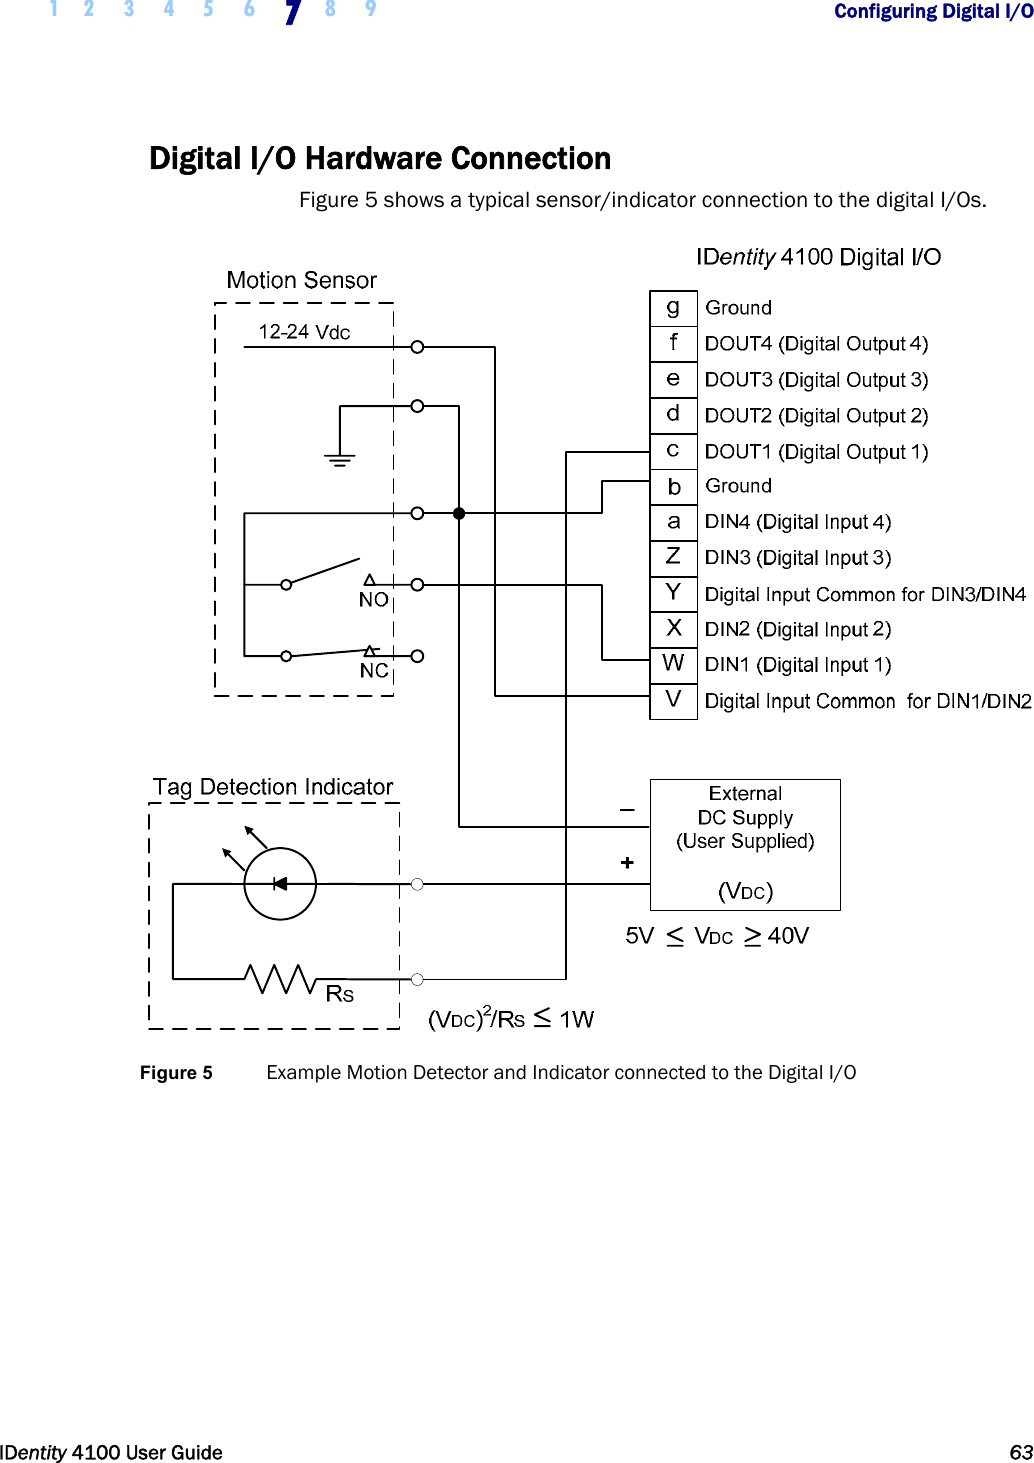  1 2 3 4 5 6 7 8 9       Configuring Digital I/O   IDentity 4100 User Guide  63  Digital I/O Hardware Connection Figure 5 shows a typical sensor/indicator connection to the digital I/Os.  Figure 5  Example Motion Detector and Indicator connected to the Digital I/O    